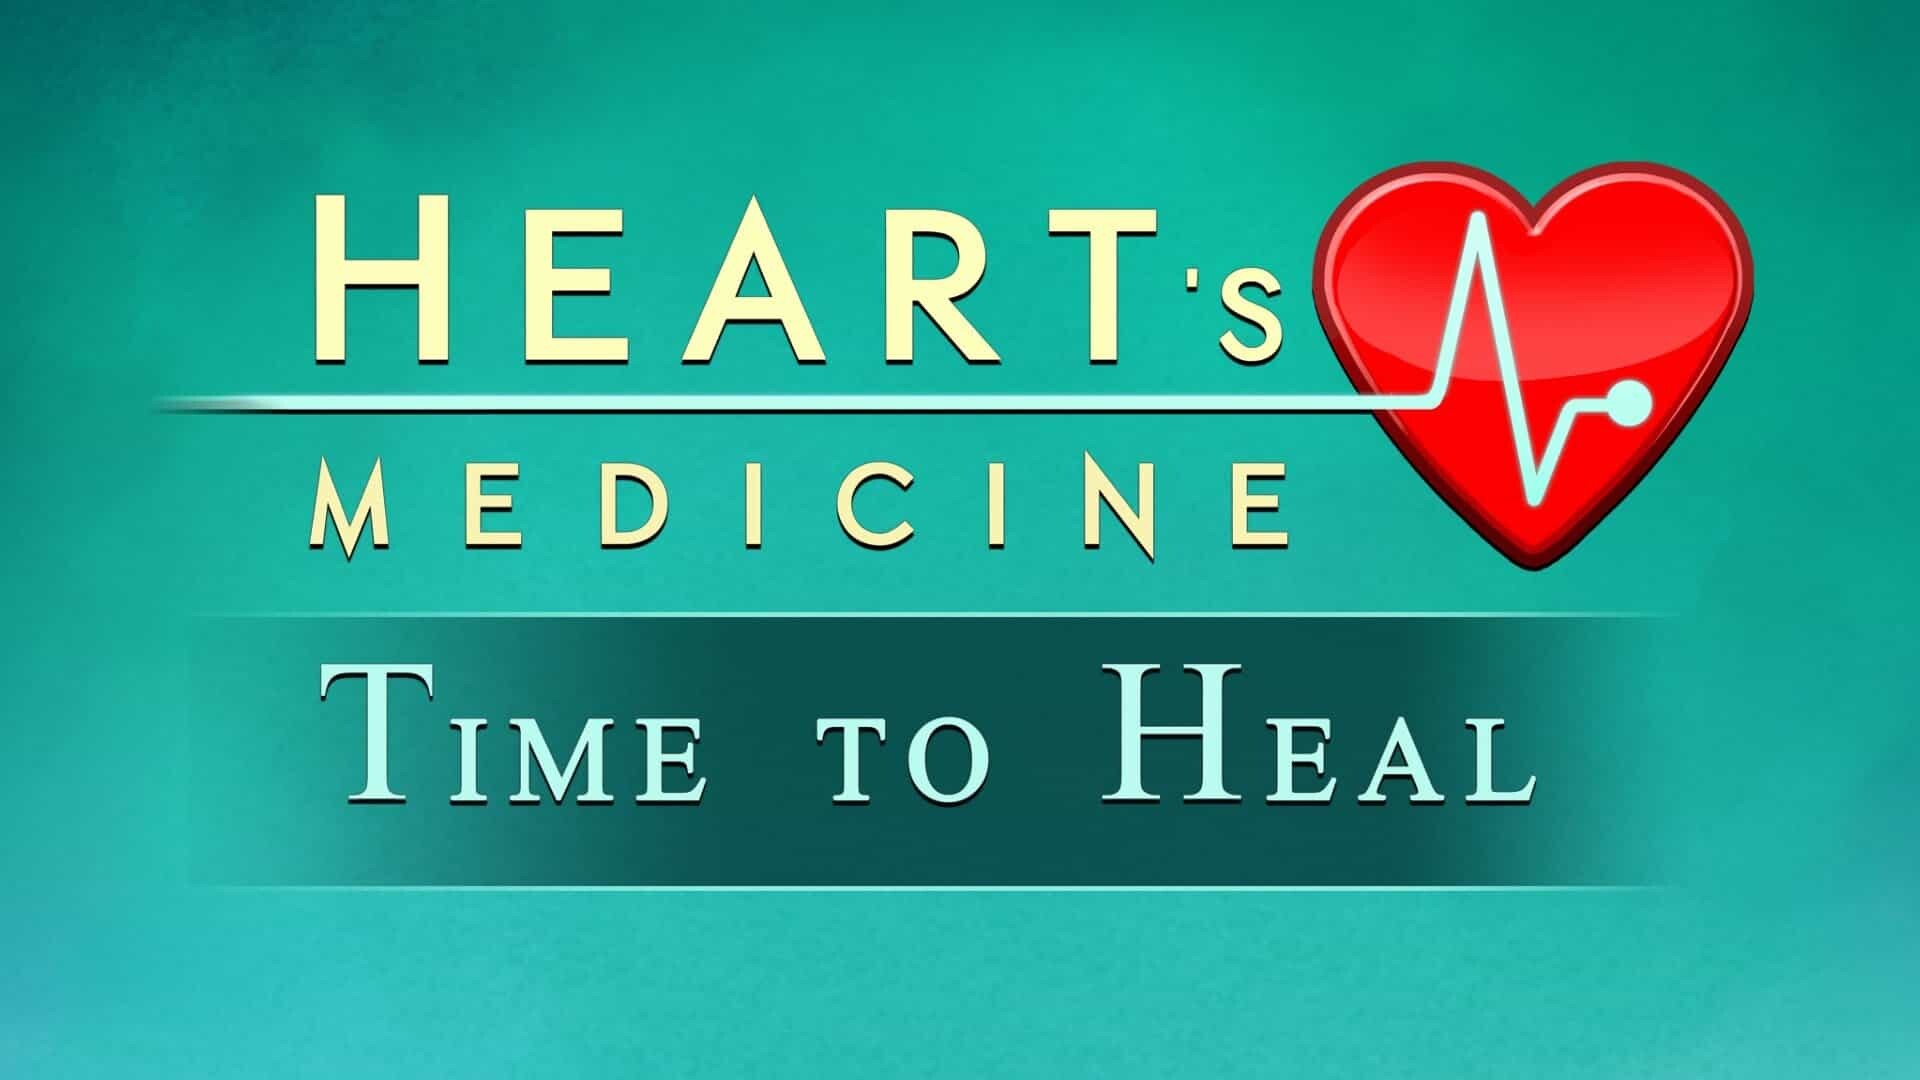 Review – Heart’s Medicine: Time to Heal